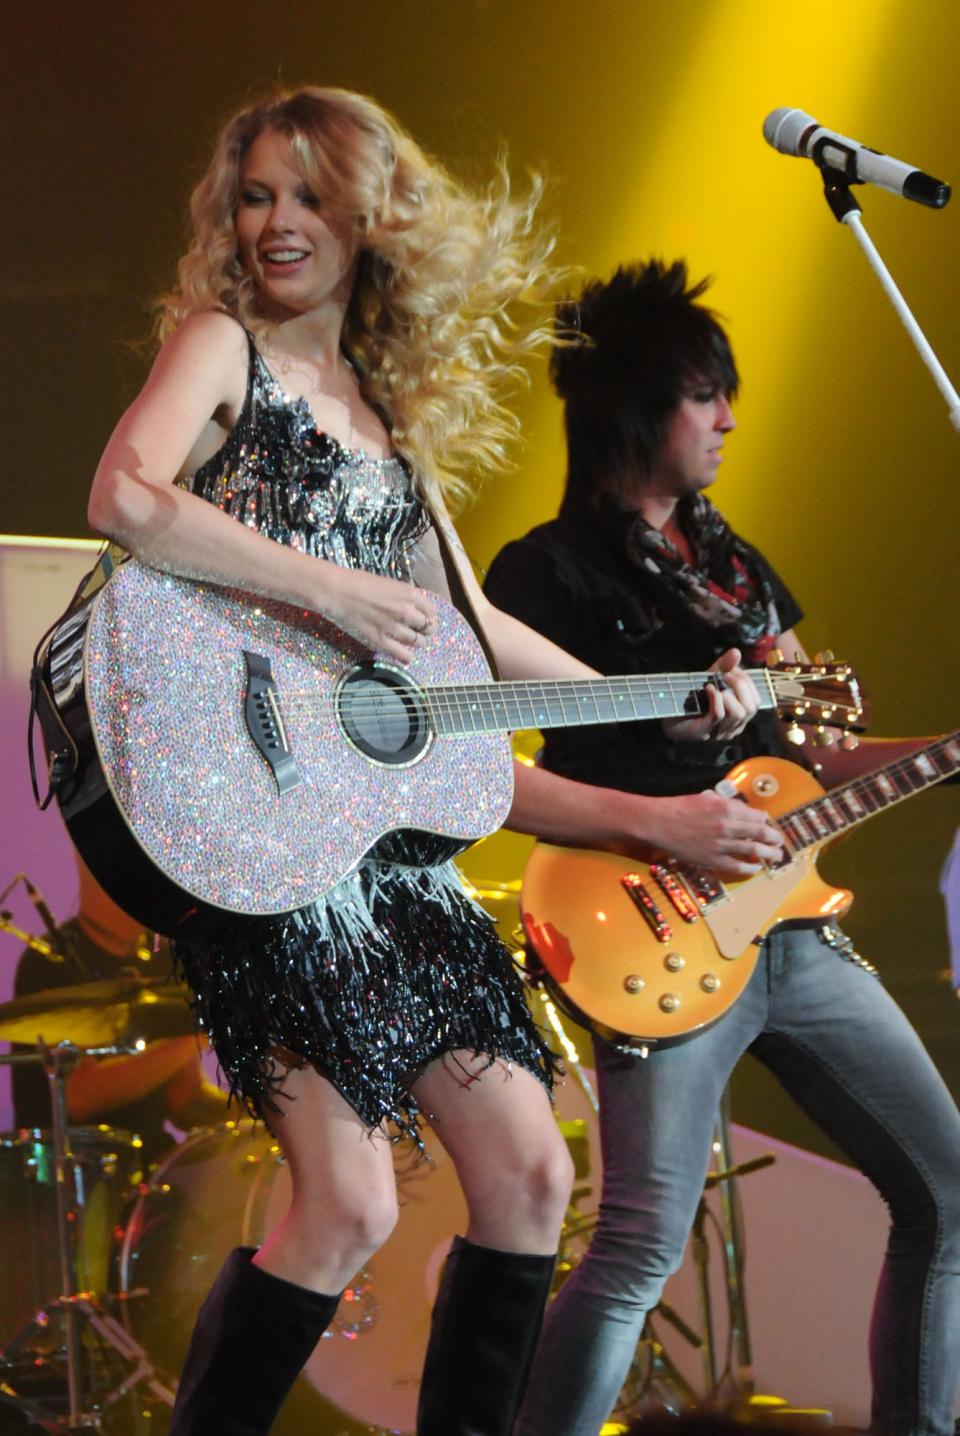 Taylor Swift performs at Wells Fargo Arena in Des Moines on June 27, 2009 when she opened for Keith Urban